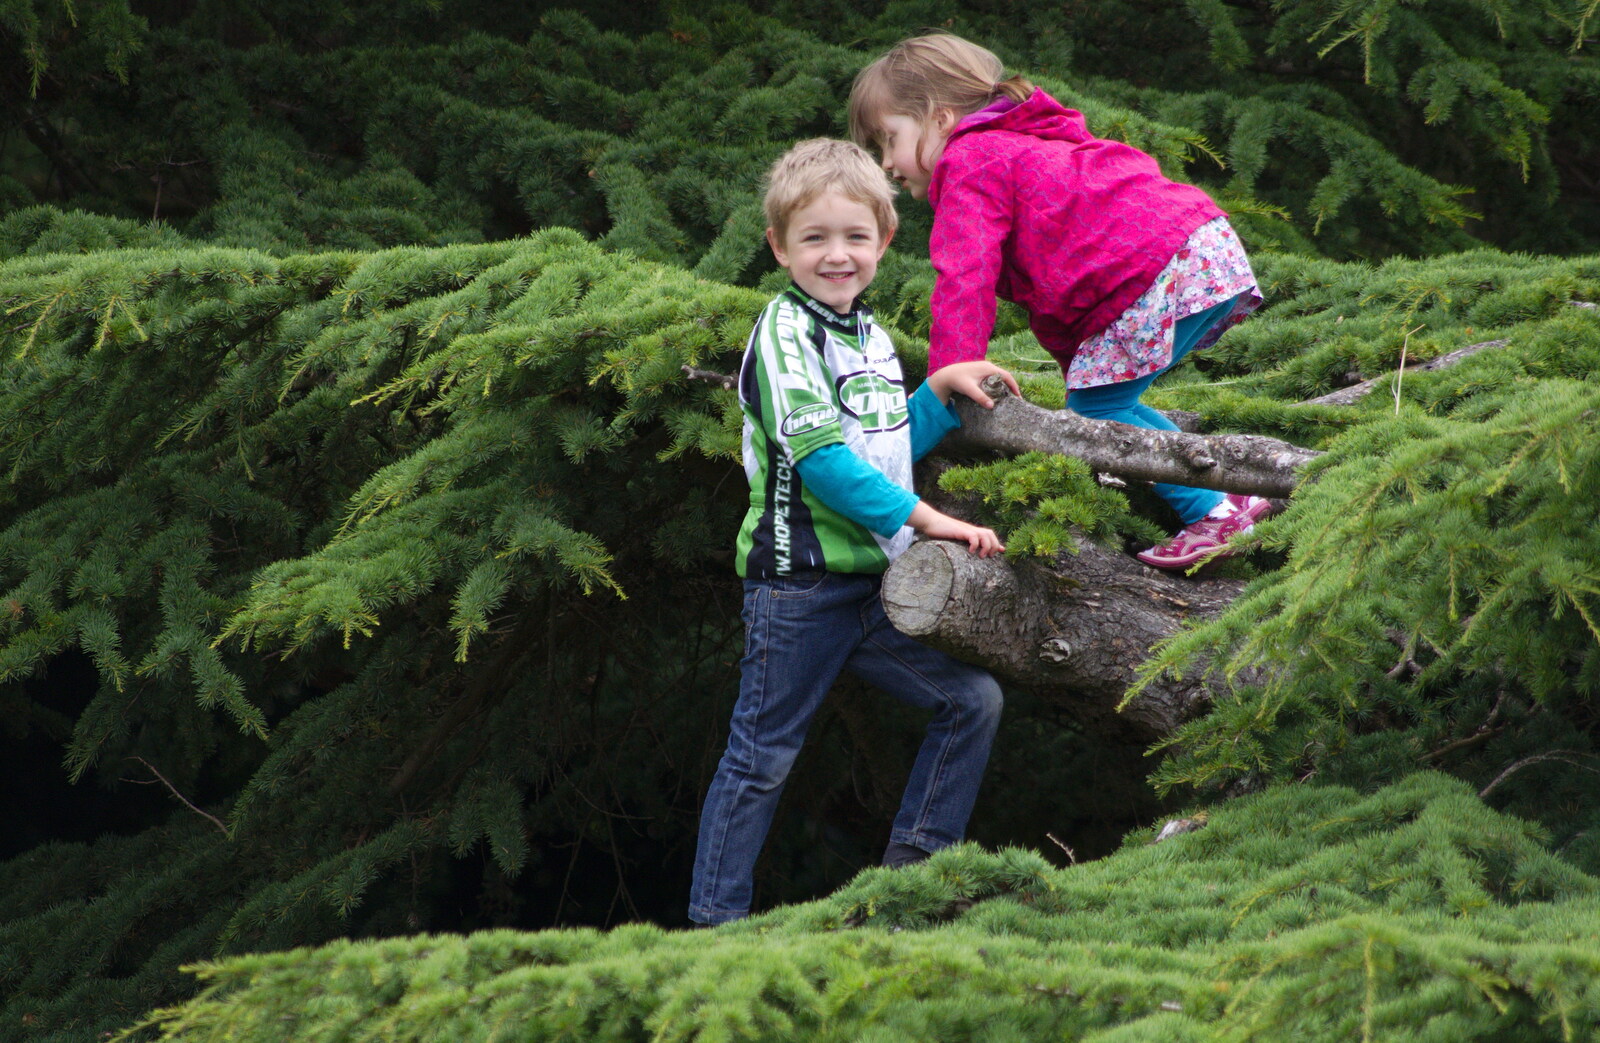 Fred and his ten-minute-chum climb a tree from Isobel's Race For Life, Chantry Park, Ipswich - 11th June 2014